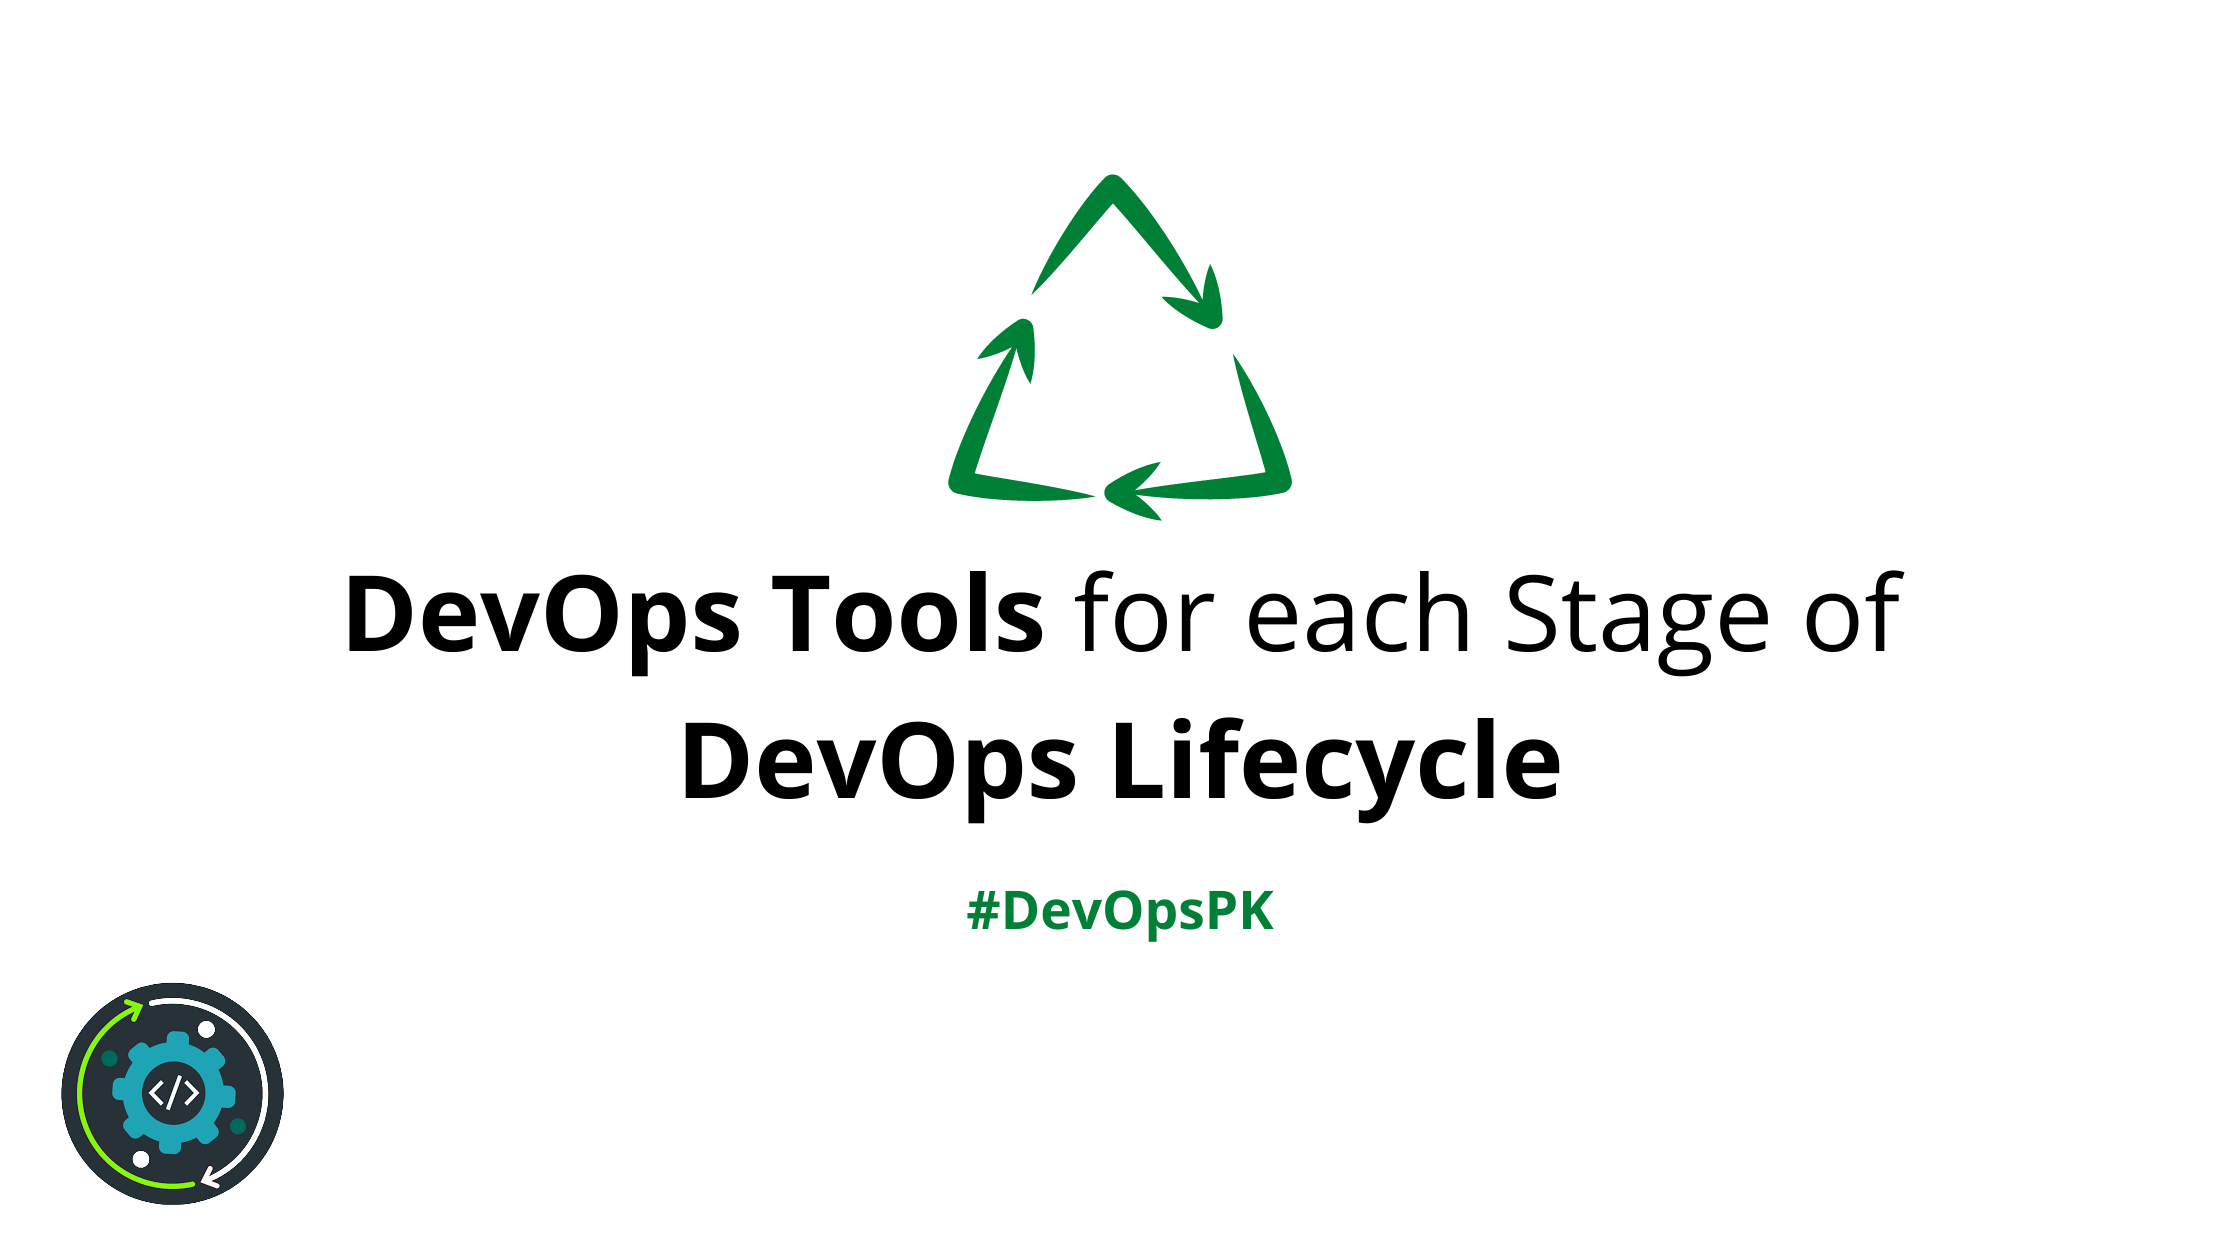 DevOps Tools for each Stage of DevOps Lifecycle